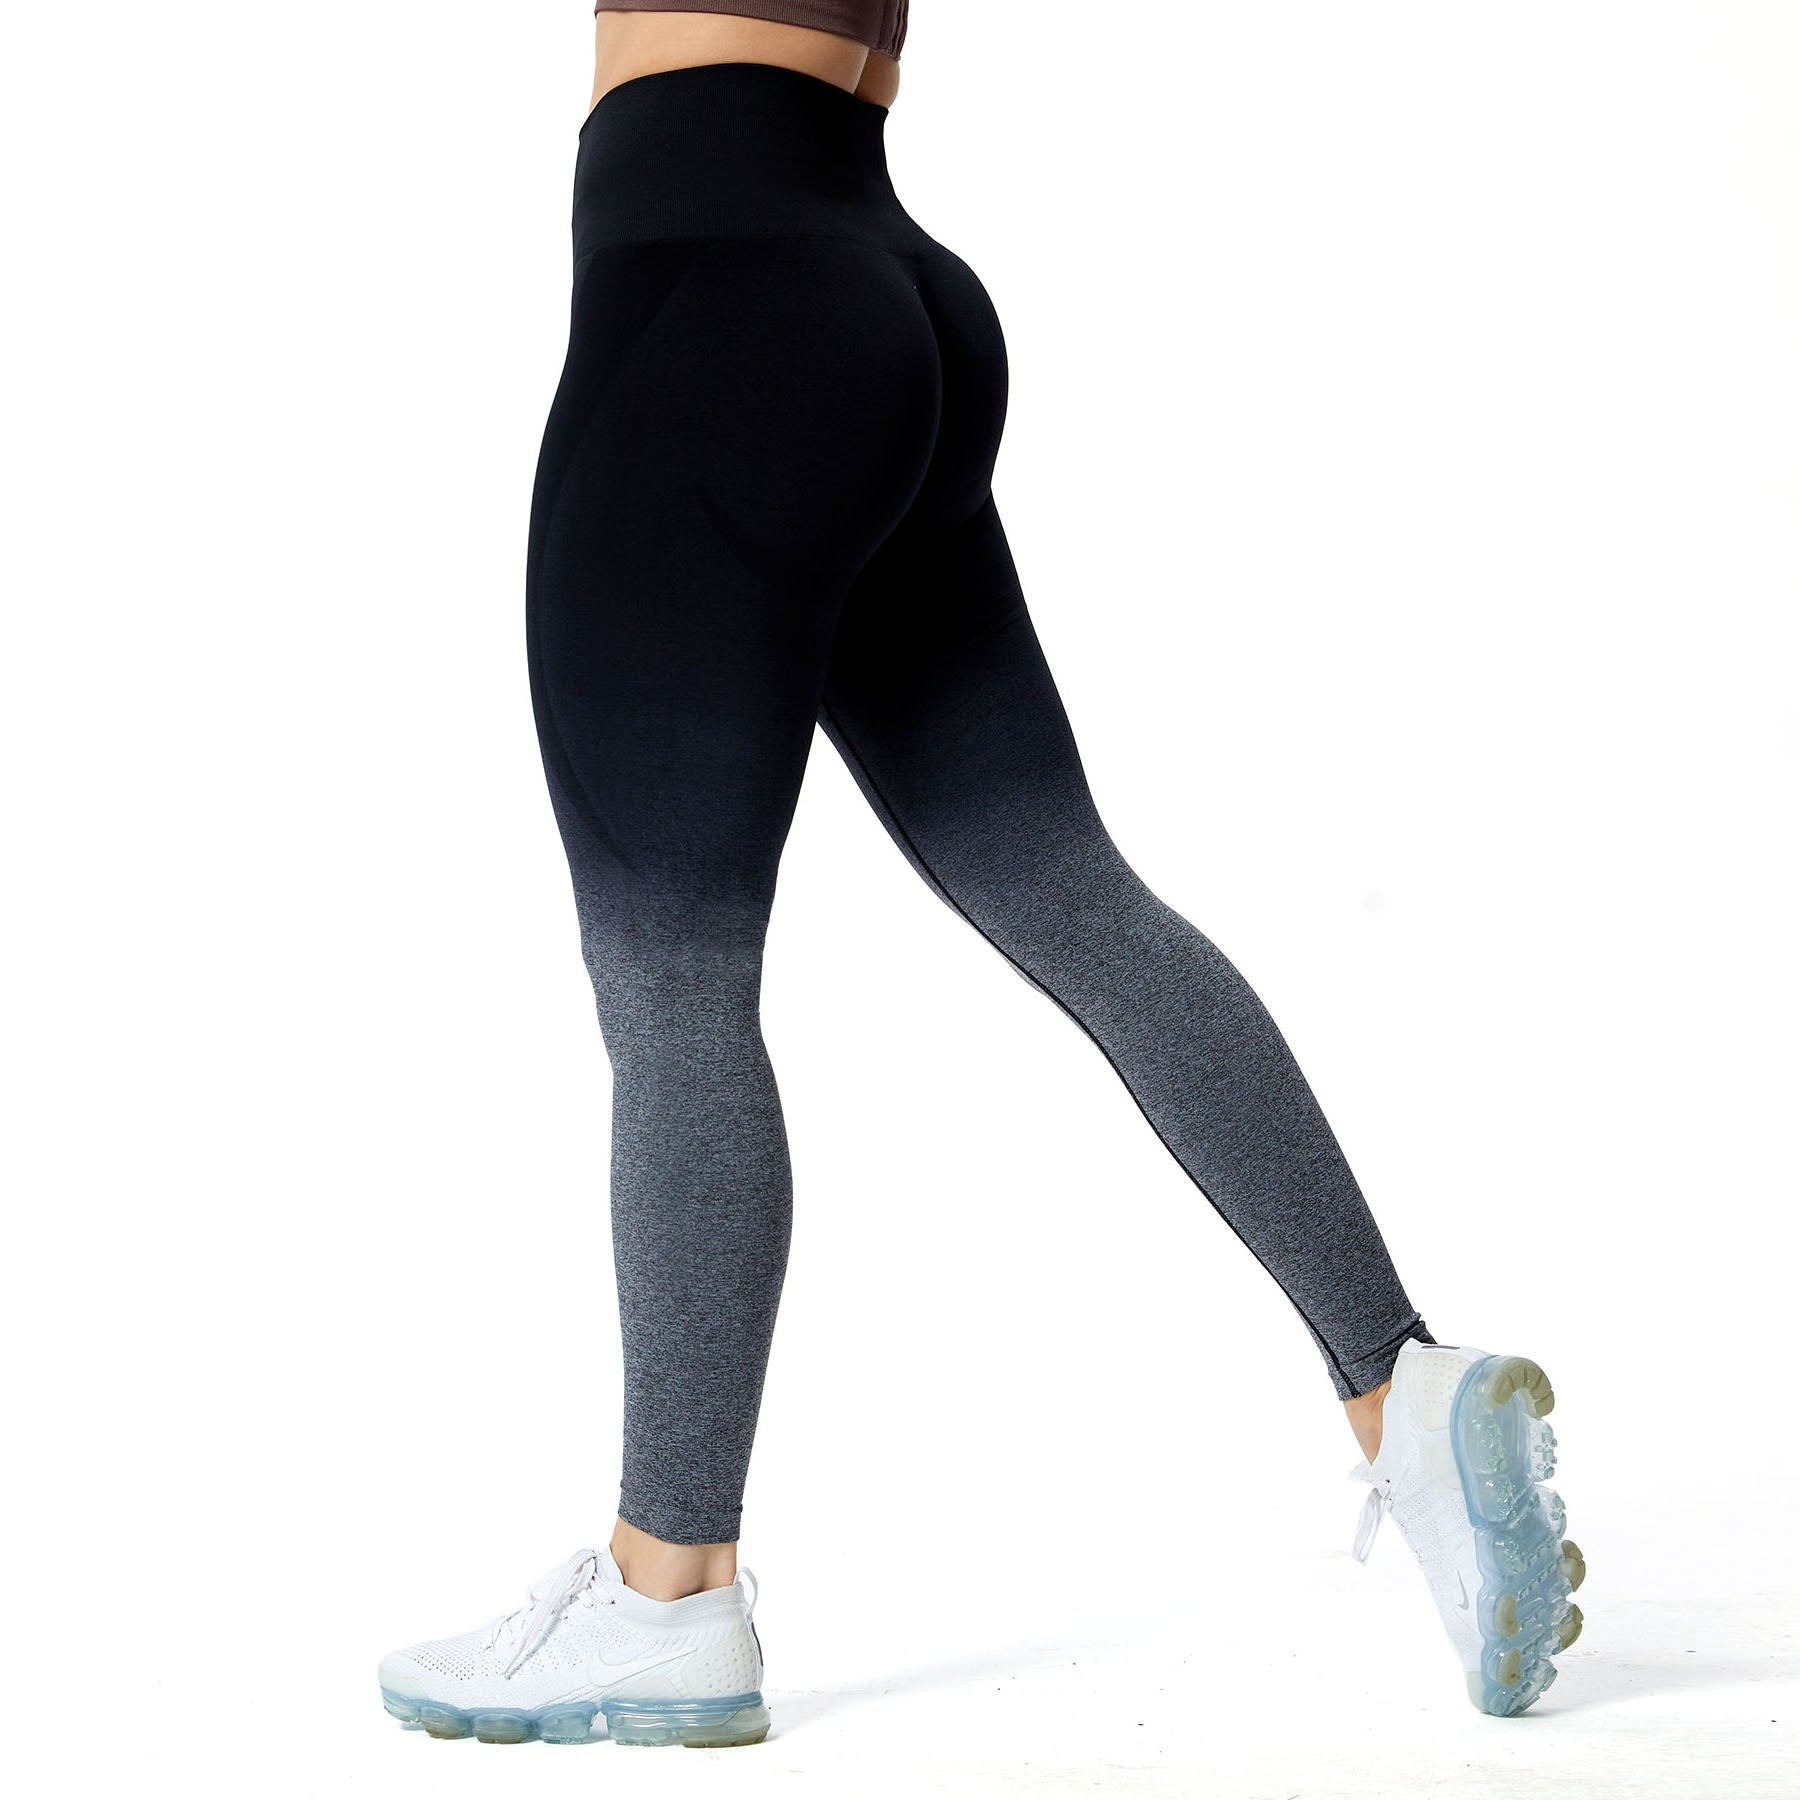  Aoxjox Women's Workout Seamless Leggings High Waised